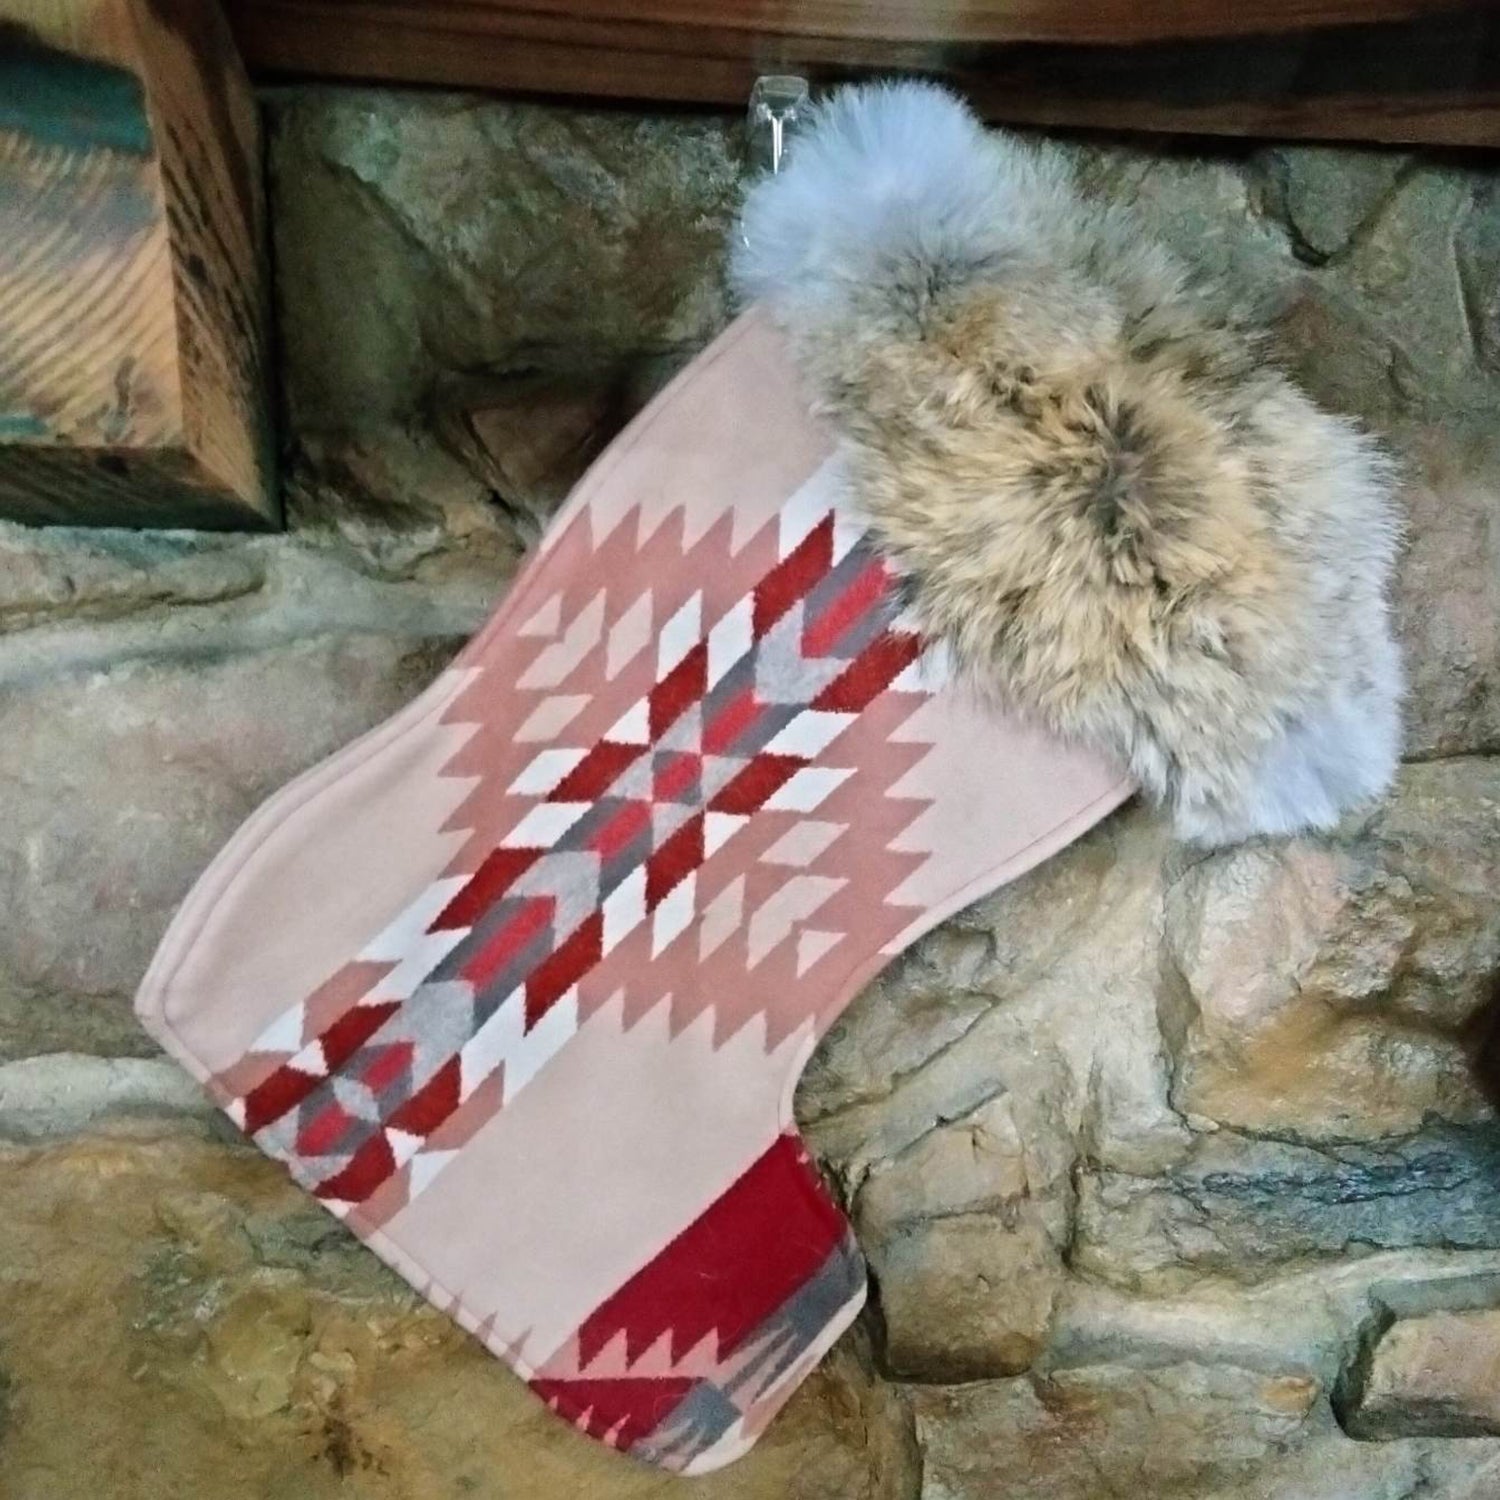 12 Days of Christmas - Fur trimmed Holiday Stockings